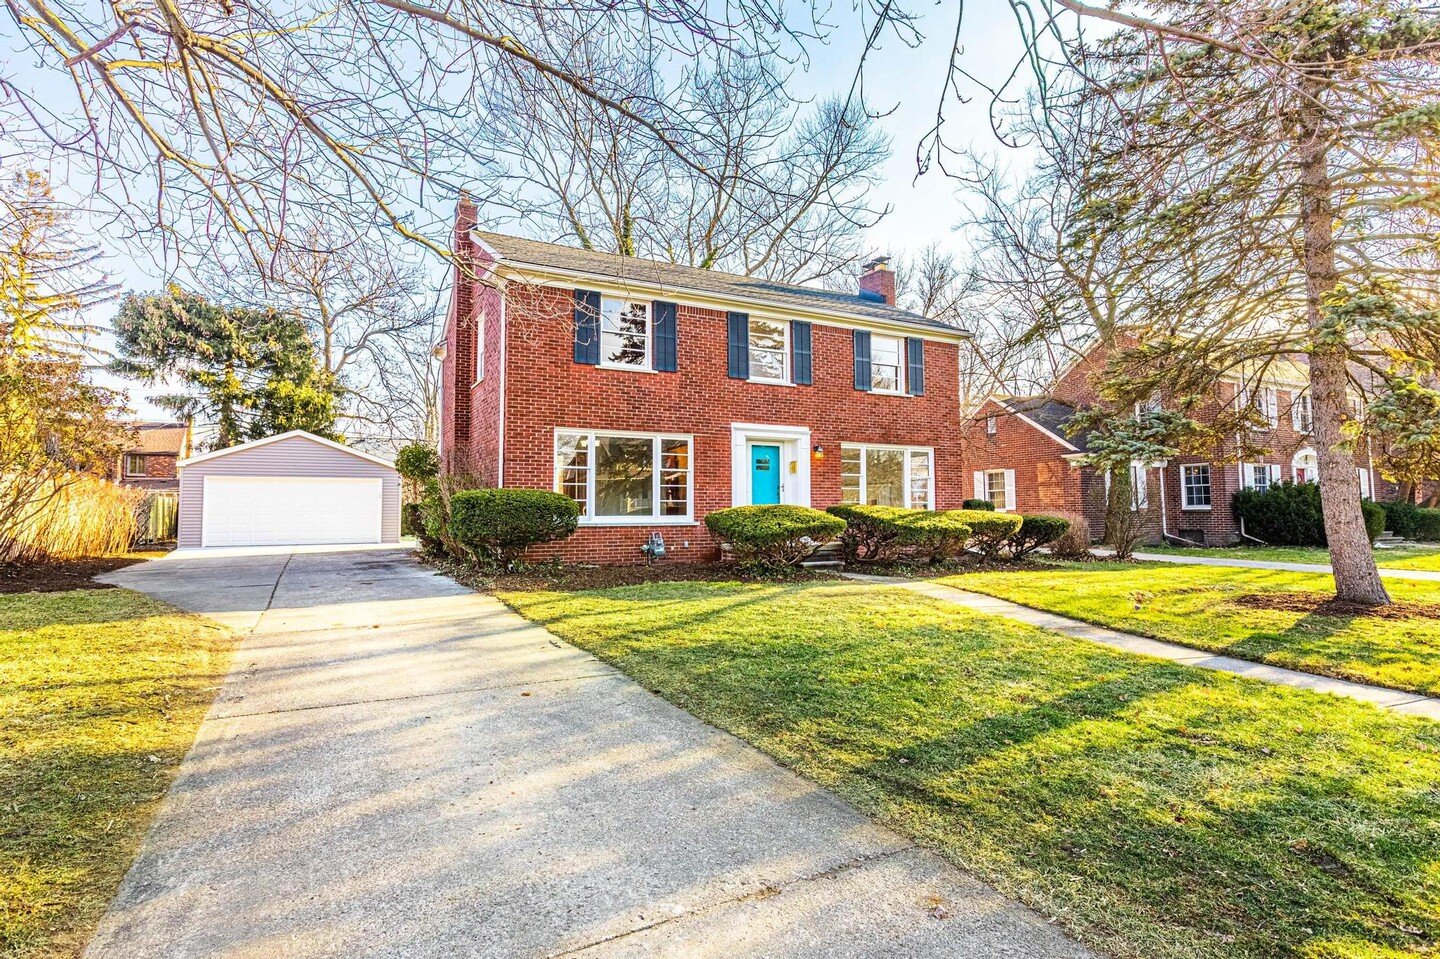 Welcome to 936 Pemberton Rd, Grosse Pointe Park. Completely move in ready, beautiful newly finished floors, spacious living area and awesome kitchen. Brought to you by THE Marissa Lee-Cavaliere @soldbymarissa ! 3 bd, 3 ba 2,200 sqft. Come check it ou